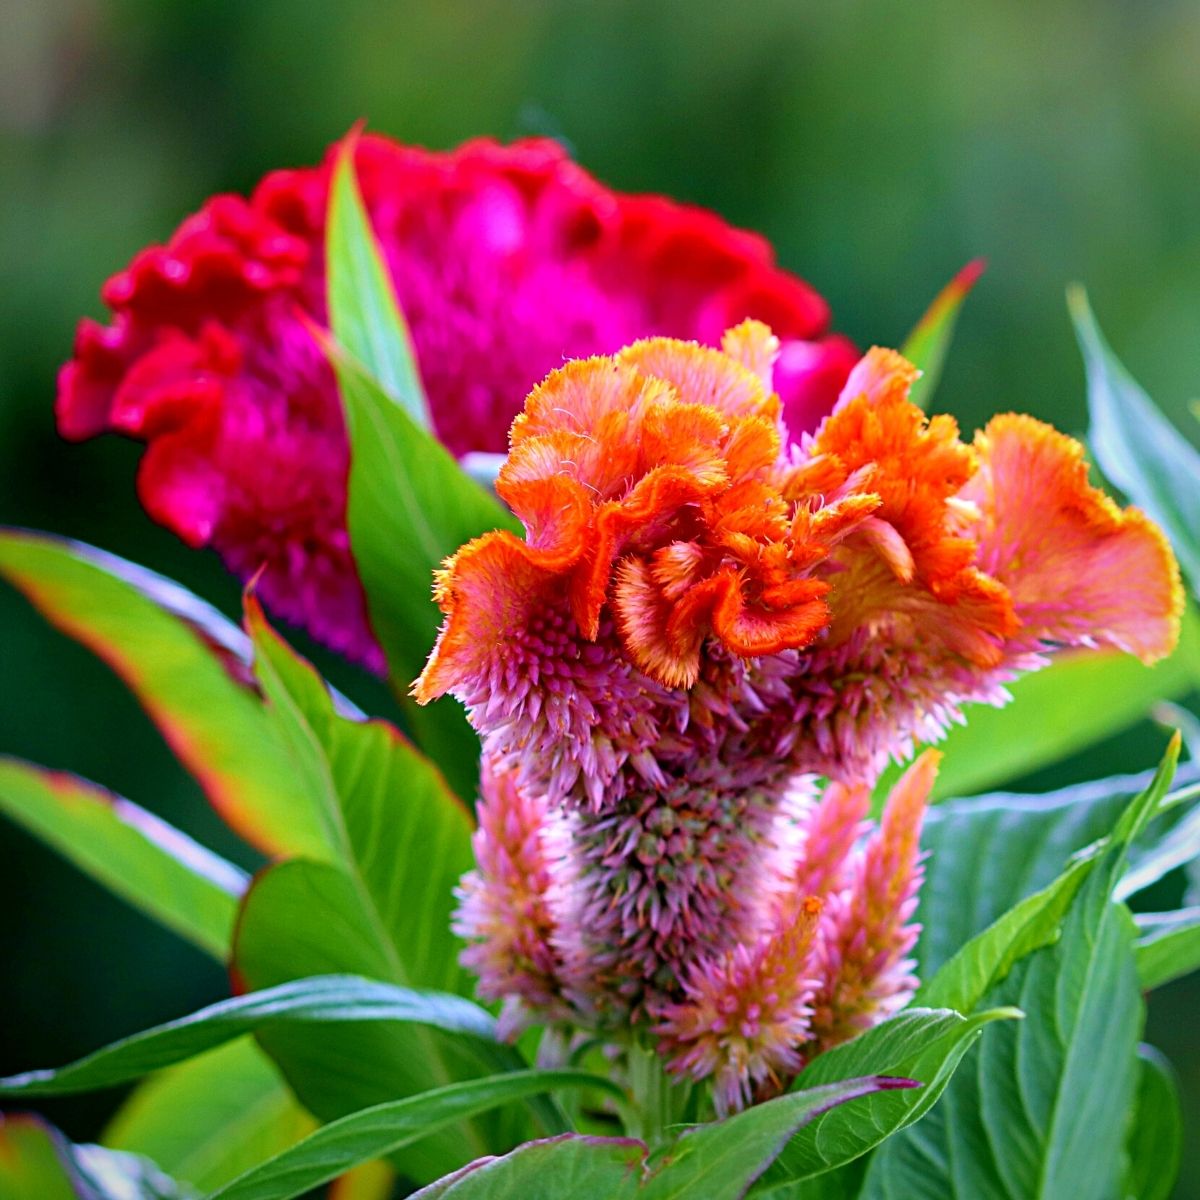 Celosia summer flower, also known as cockscomb